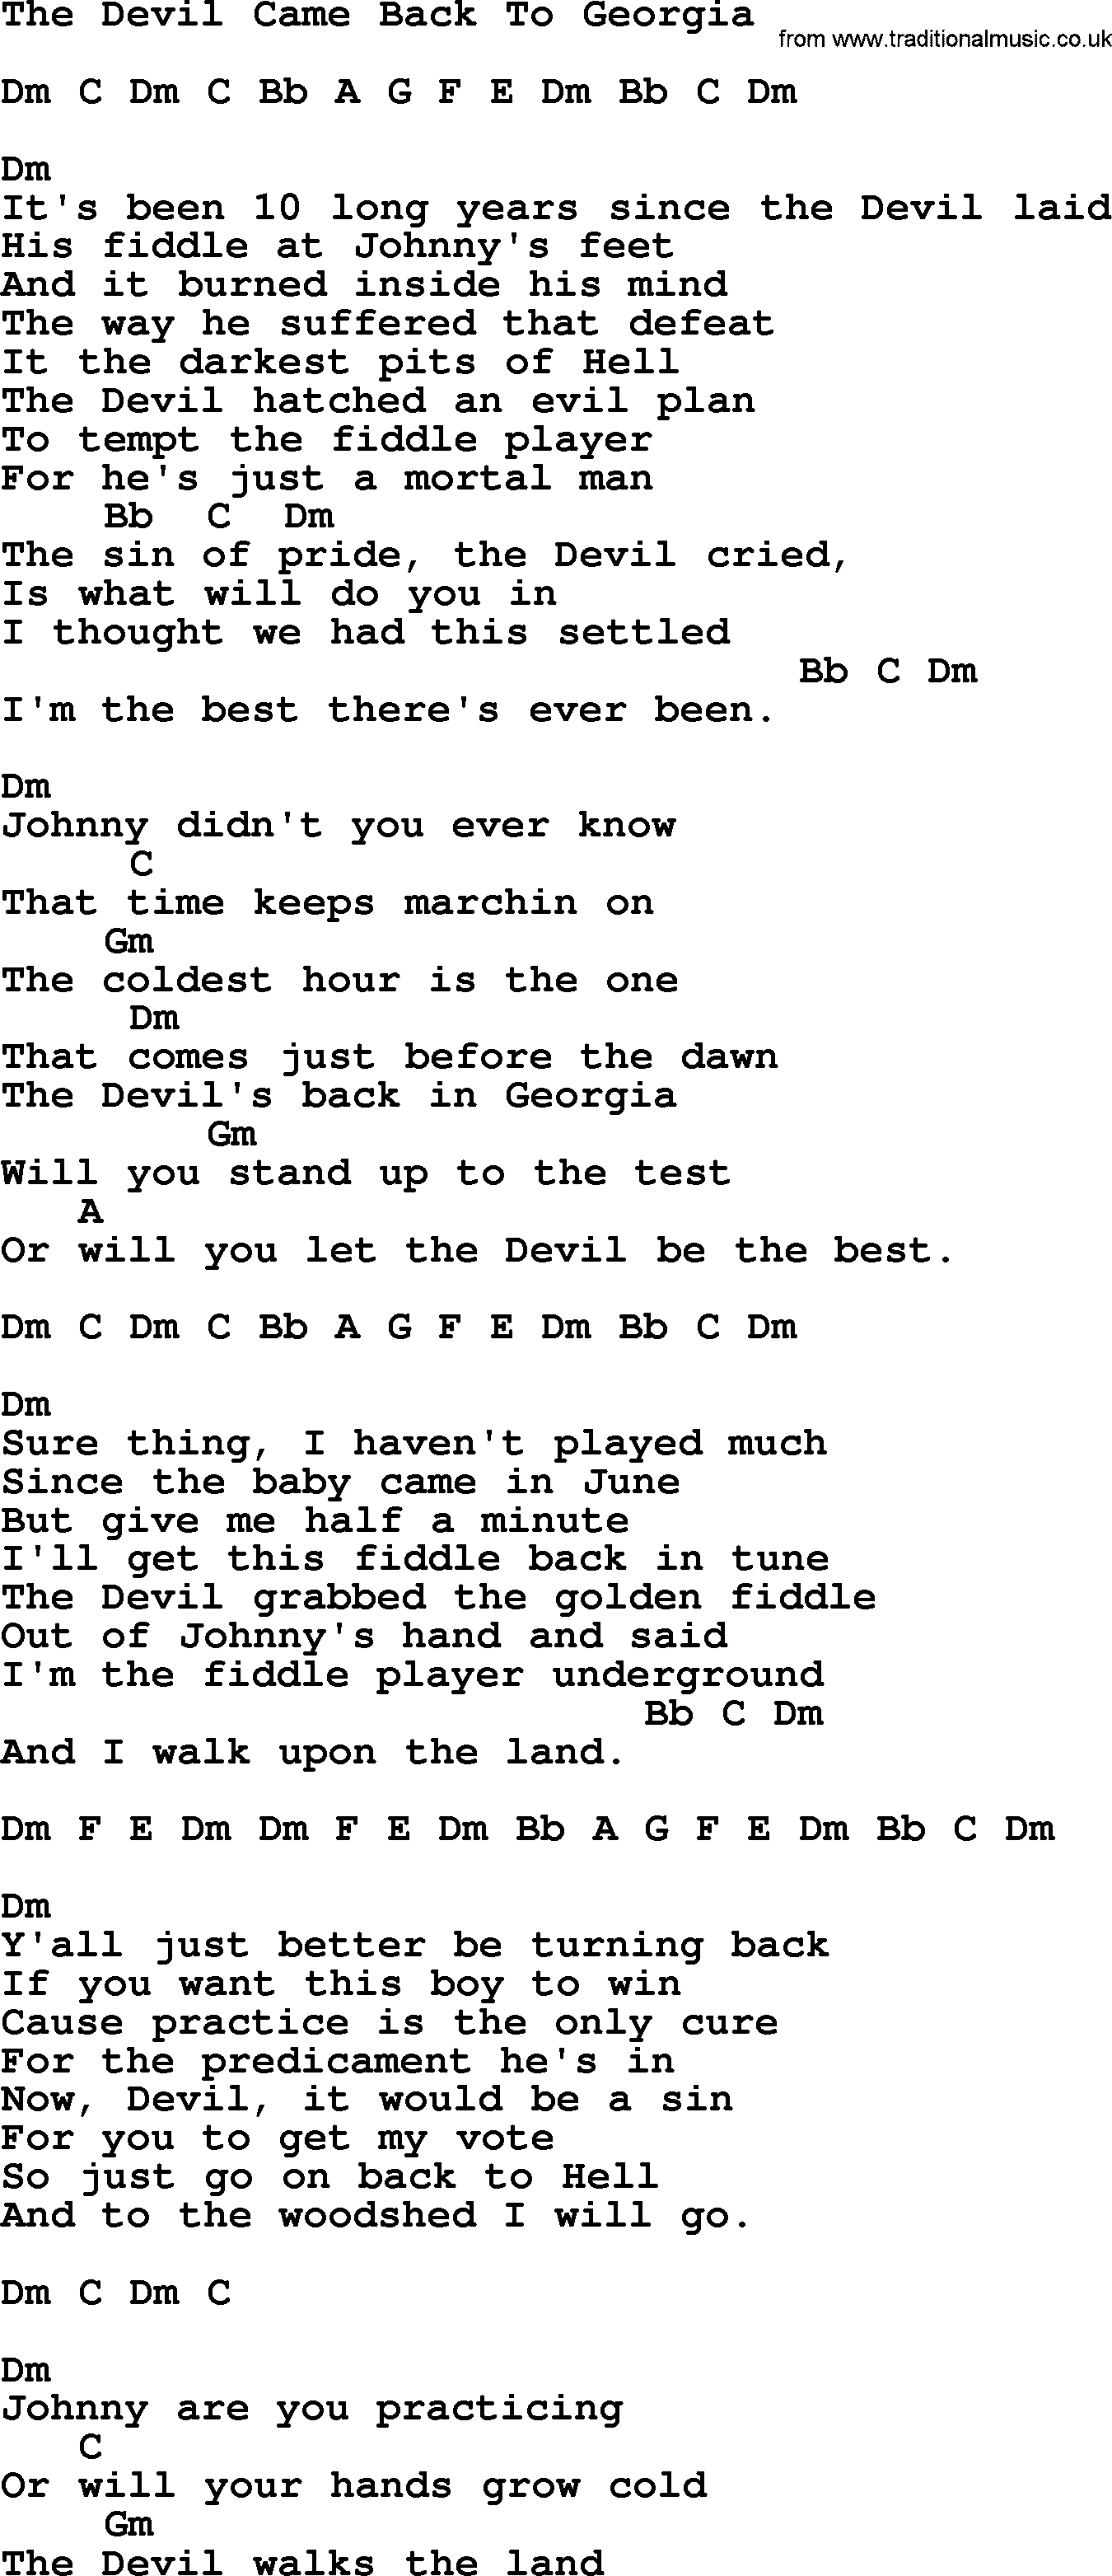 Johnny Cash song The Devil Came Back To Georgia, lyrics and chords